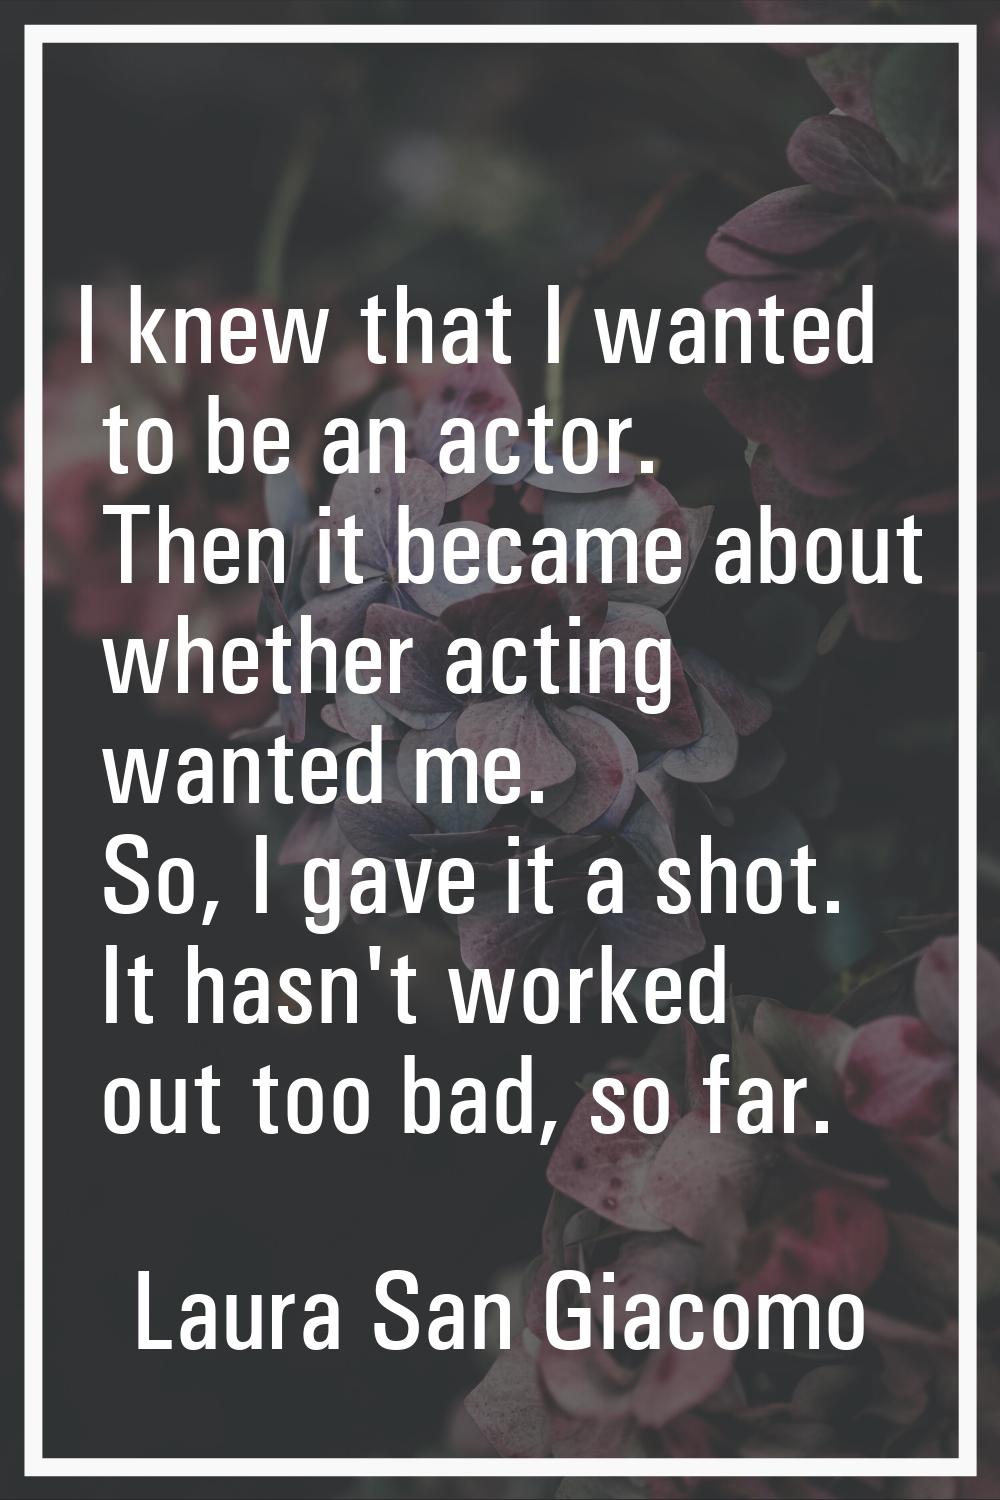 I knew that I wanted to be an actor. Then it became about whether acting wanted me. So, I gave it a